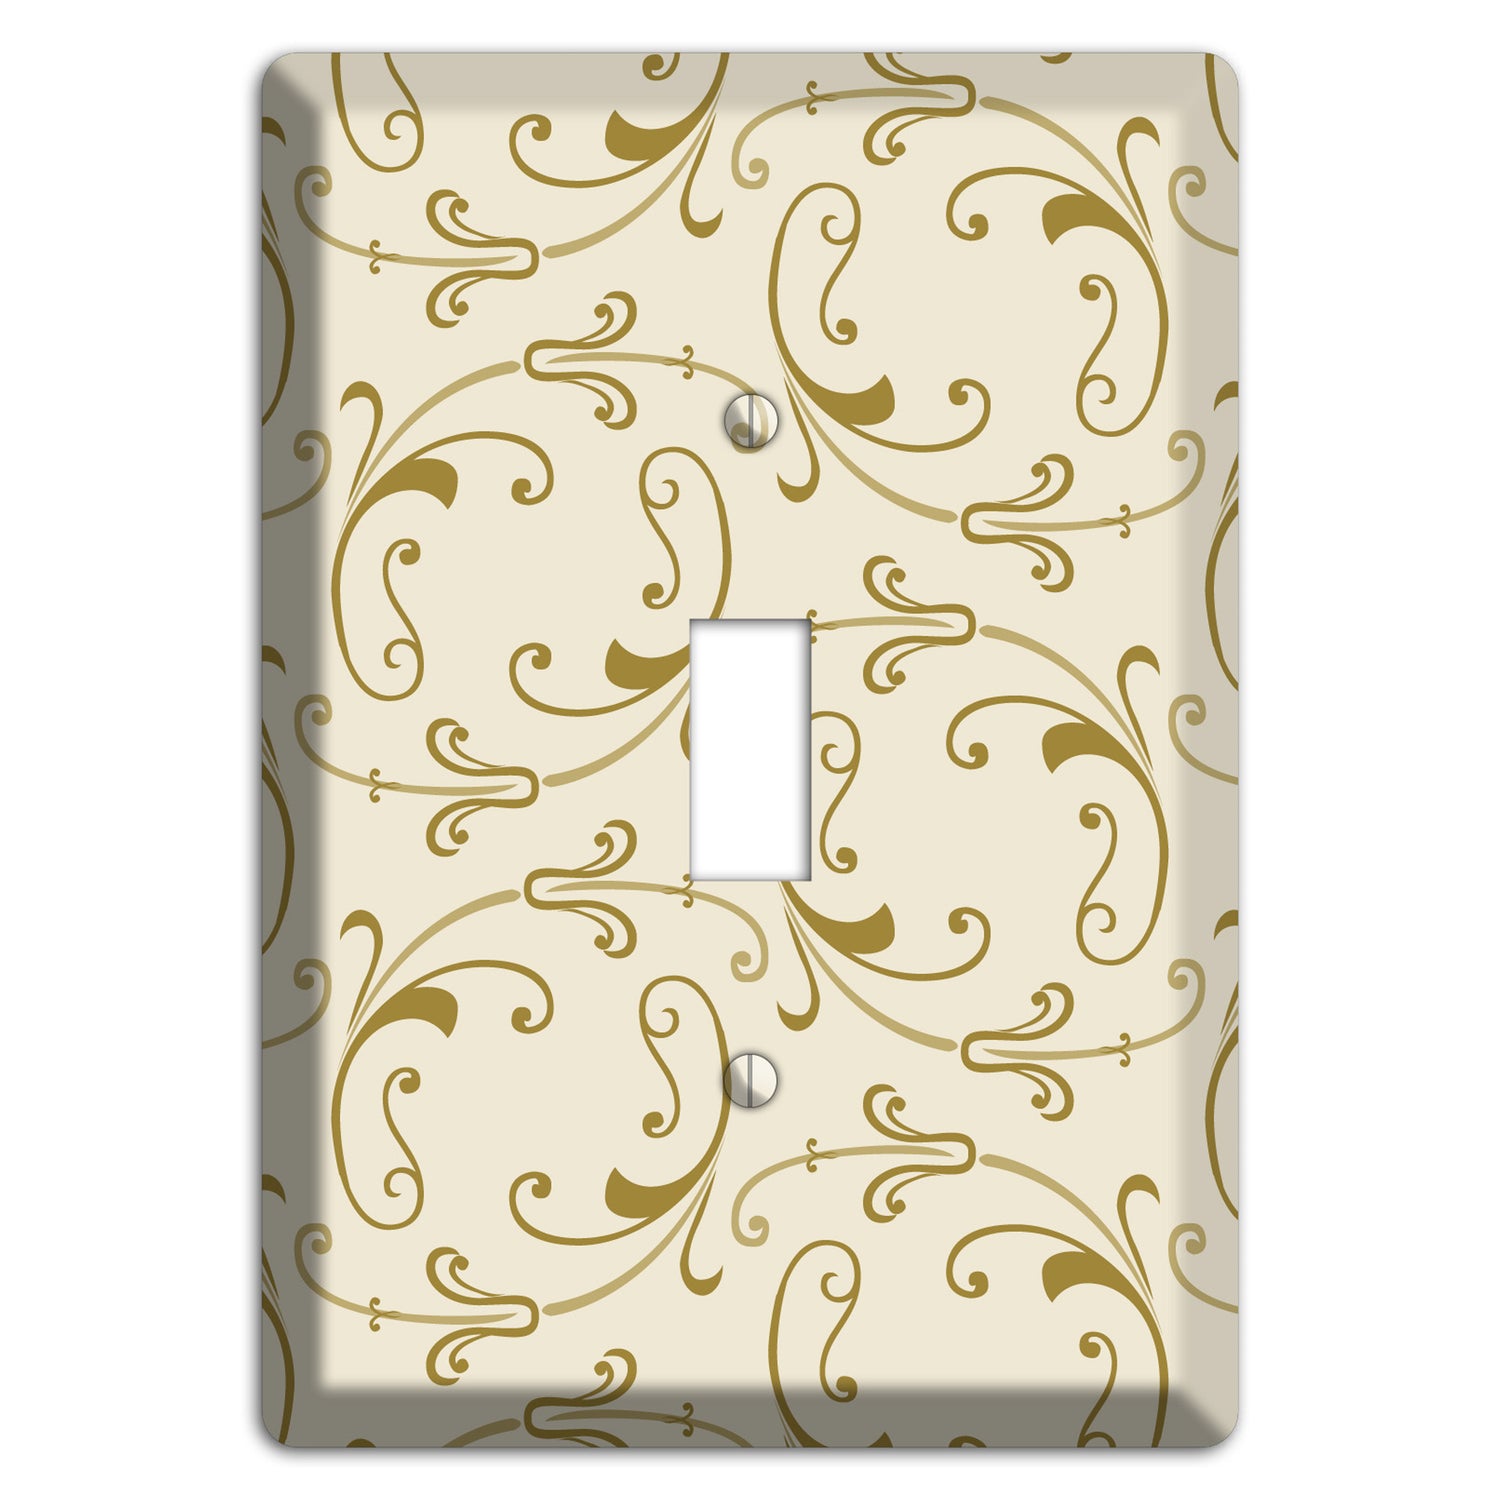 Off White with Gold Victorian Sprig Cover Plates